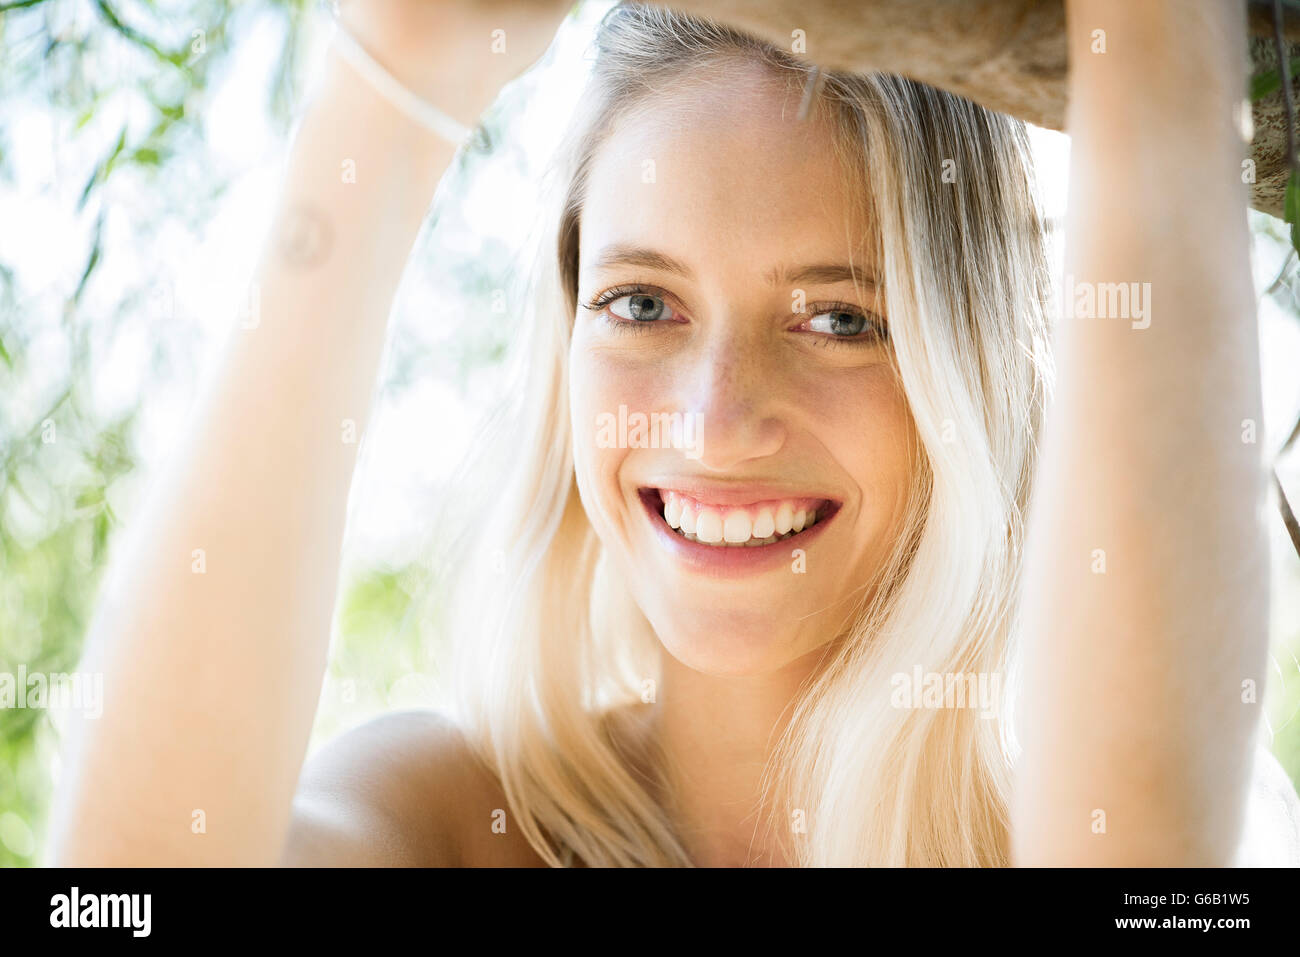 Young woman leaning against tree branch, smiling, portrait Stock Photo